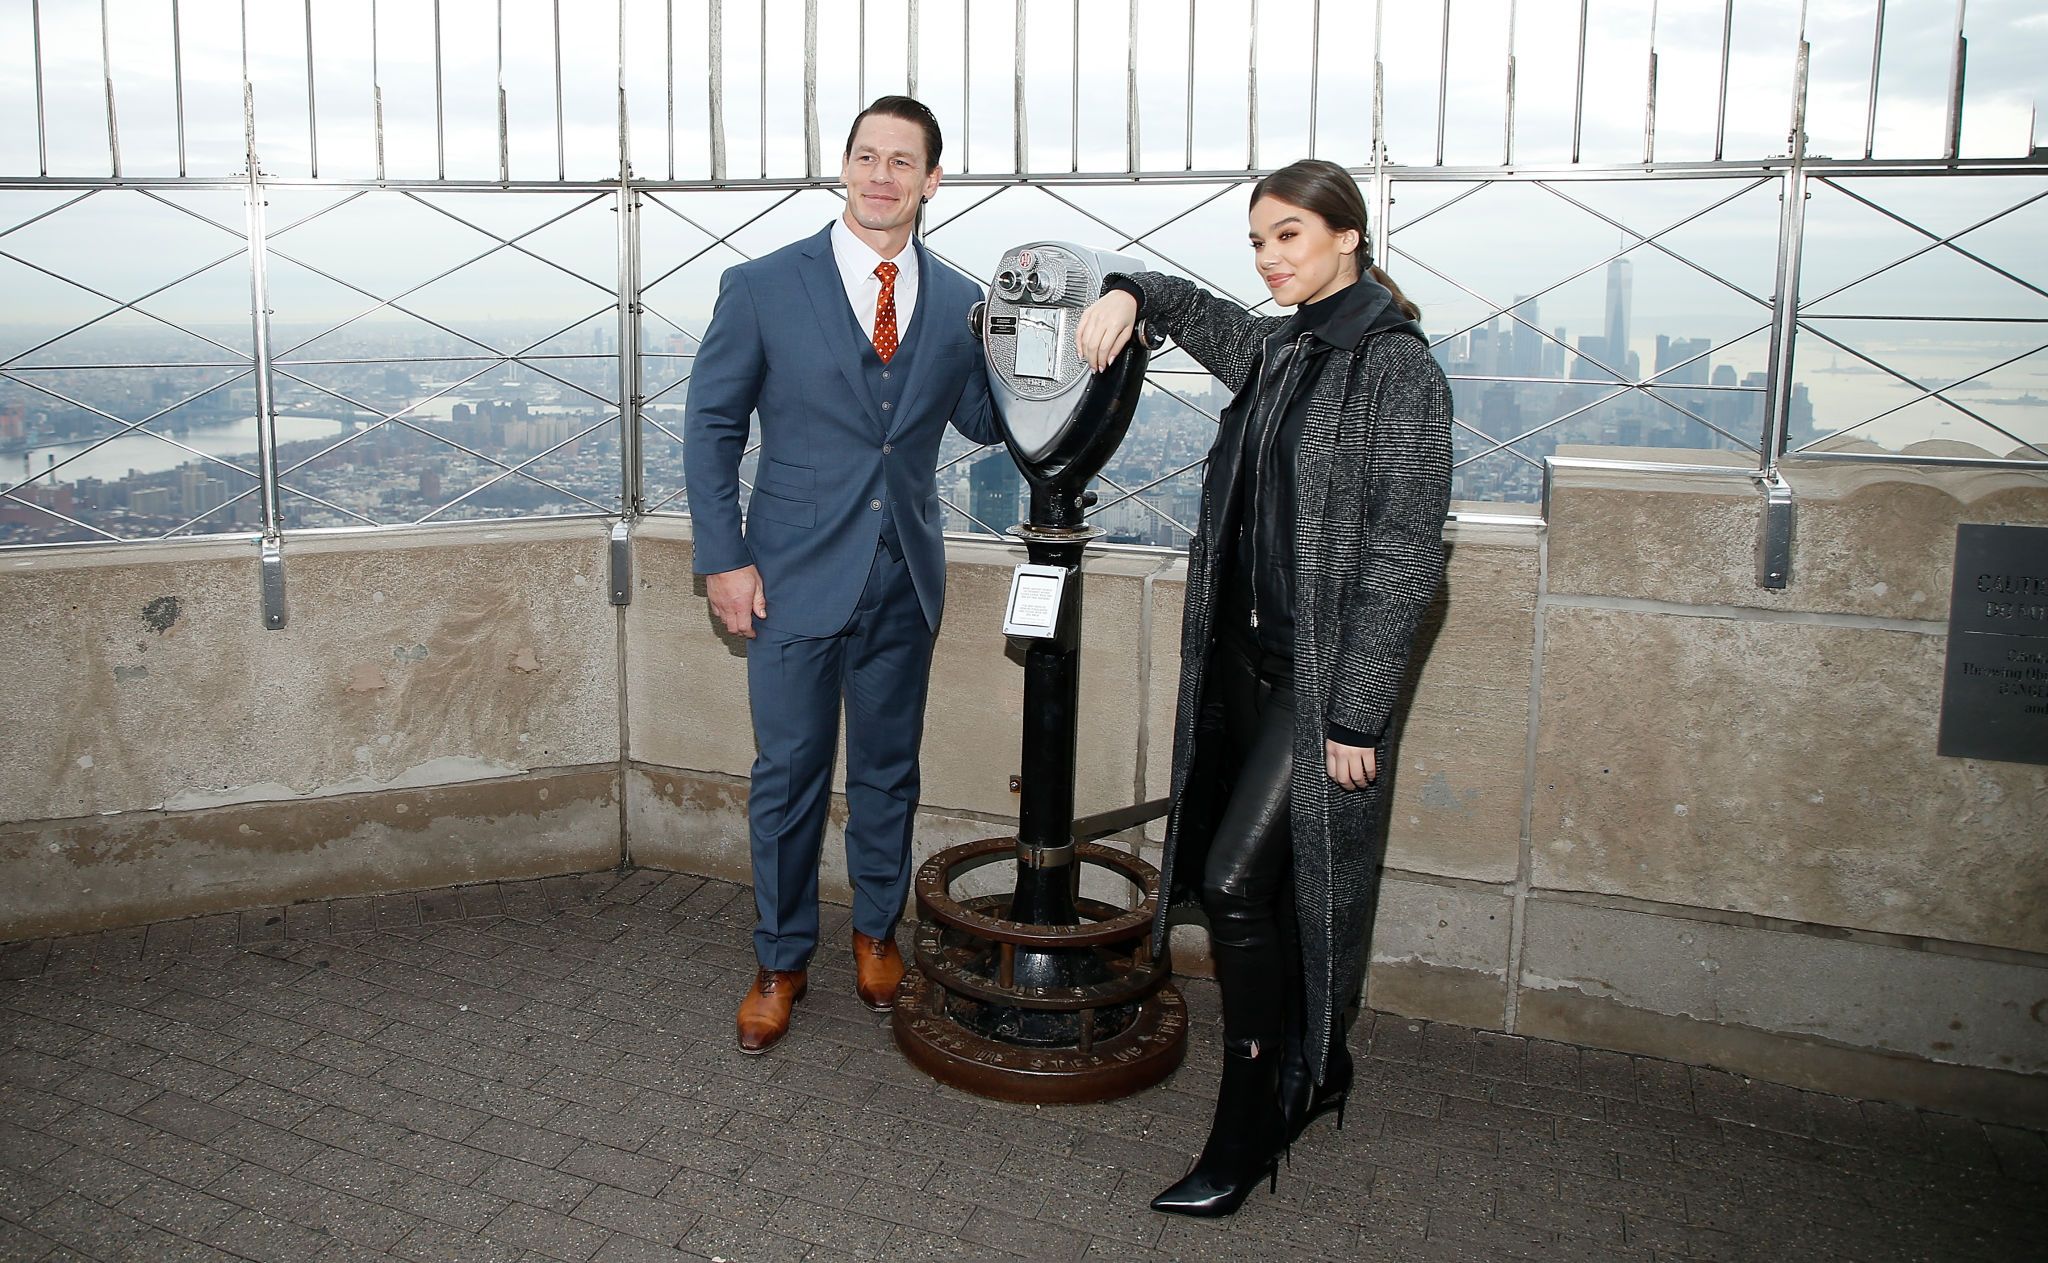 Hailee Steinfeld at the Empire State Building